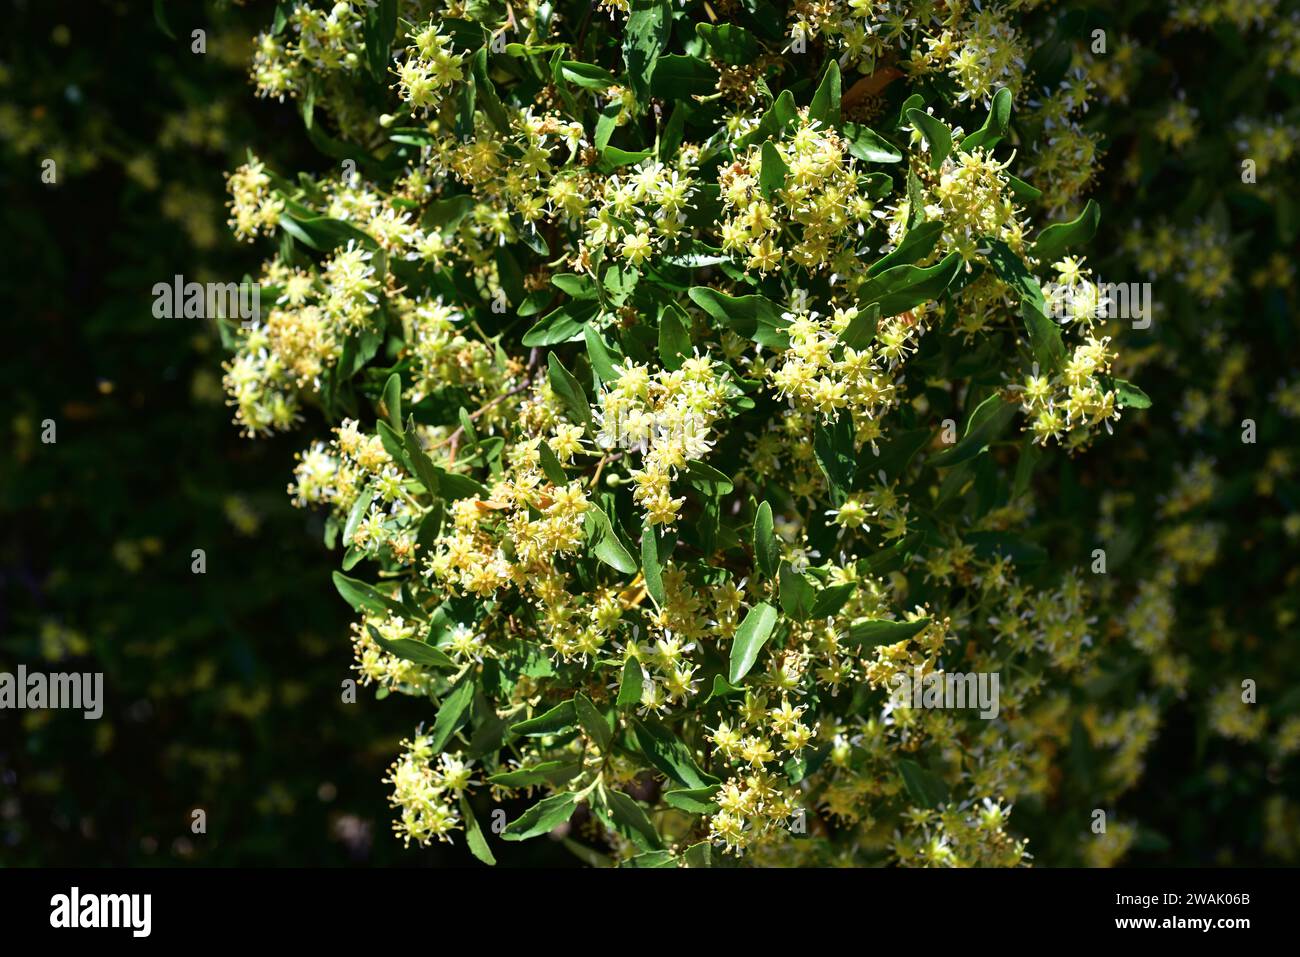 Soap bark tree (Quillaja saponaria) is an evergreen tree endemic to central Chile. Its bark contains saponin used in pharmacy, cosmetics and industry. Stock Photo